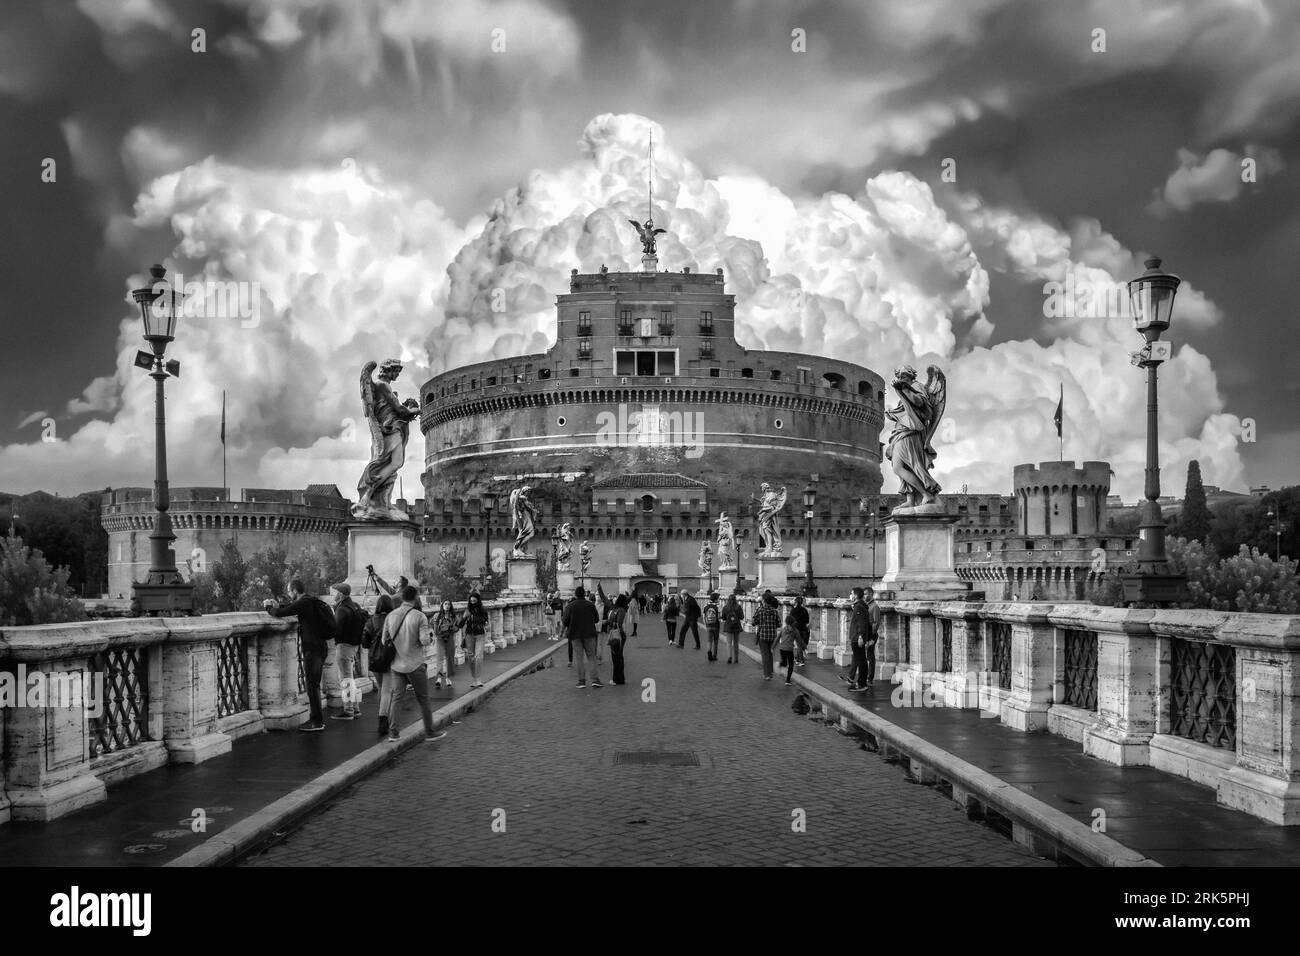 The Castel Sant'Angelo, a majestic building in Rome, Italy Stock Photo